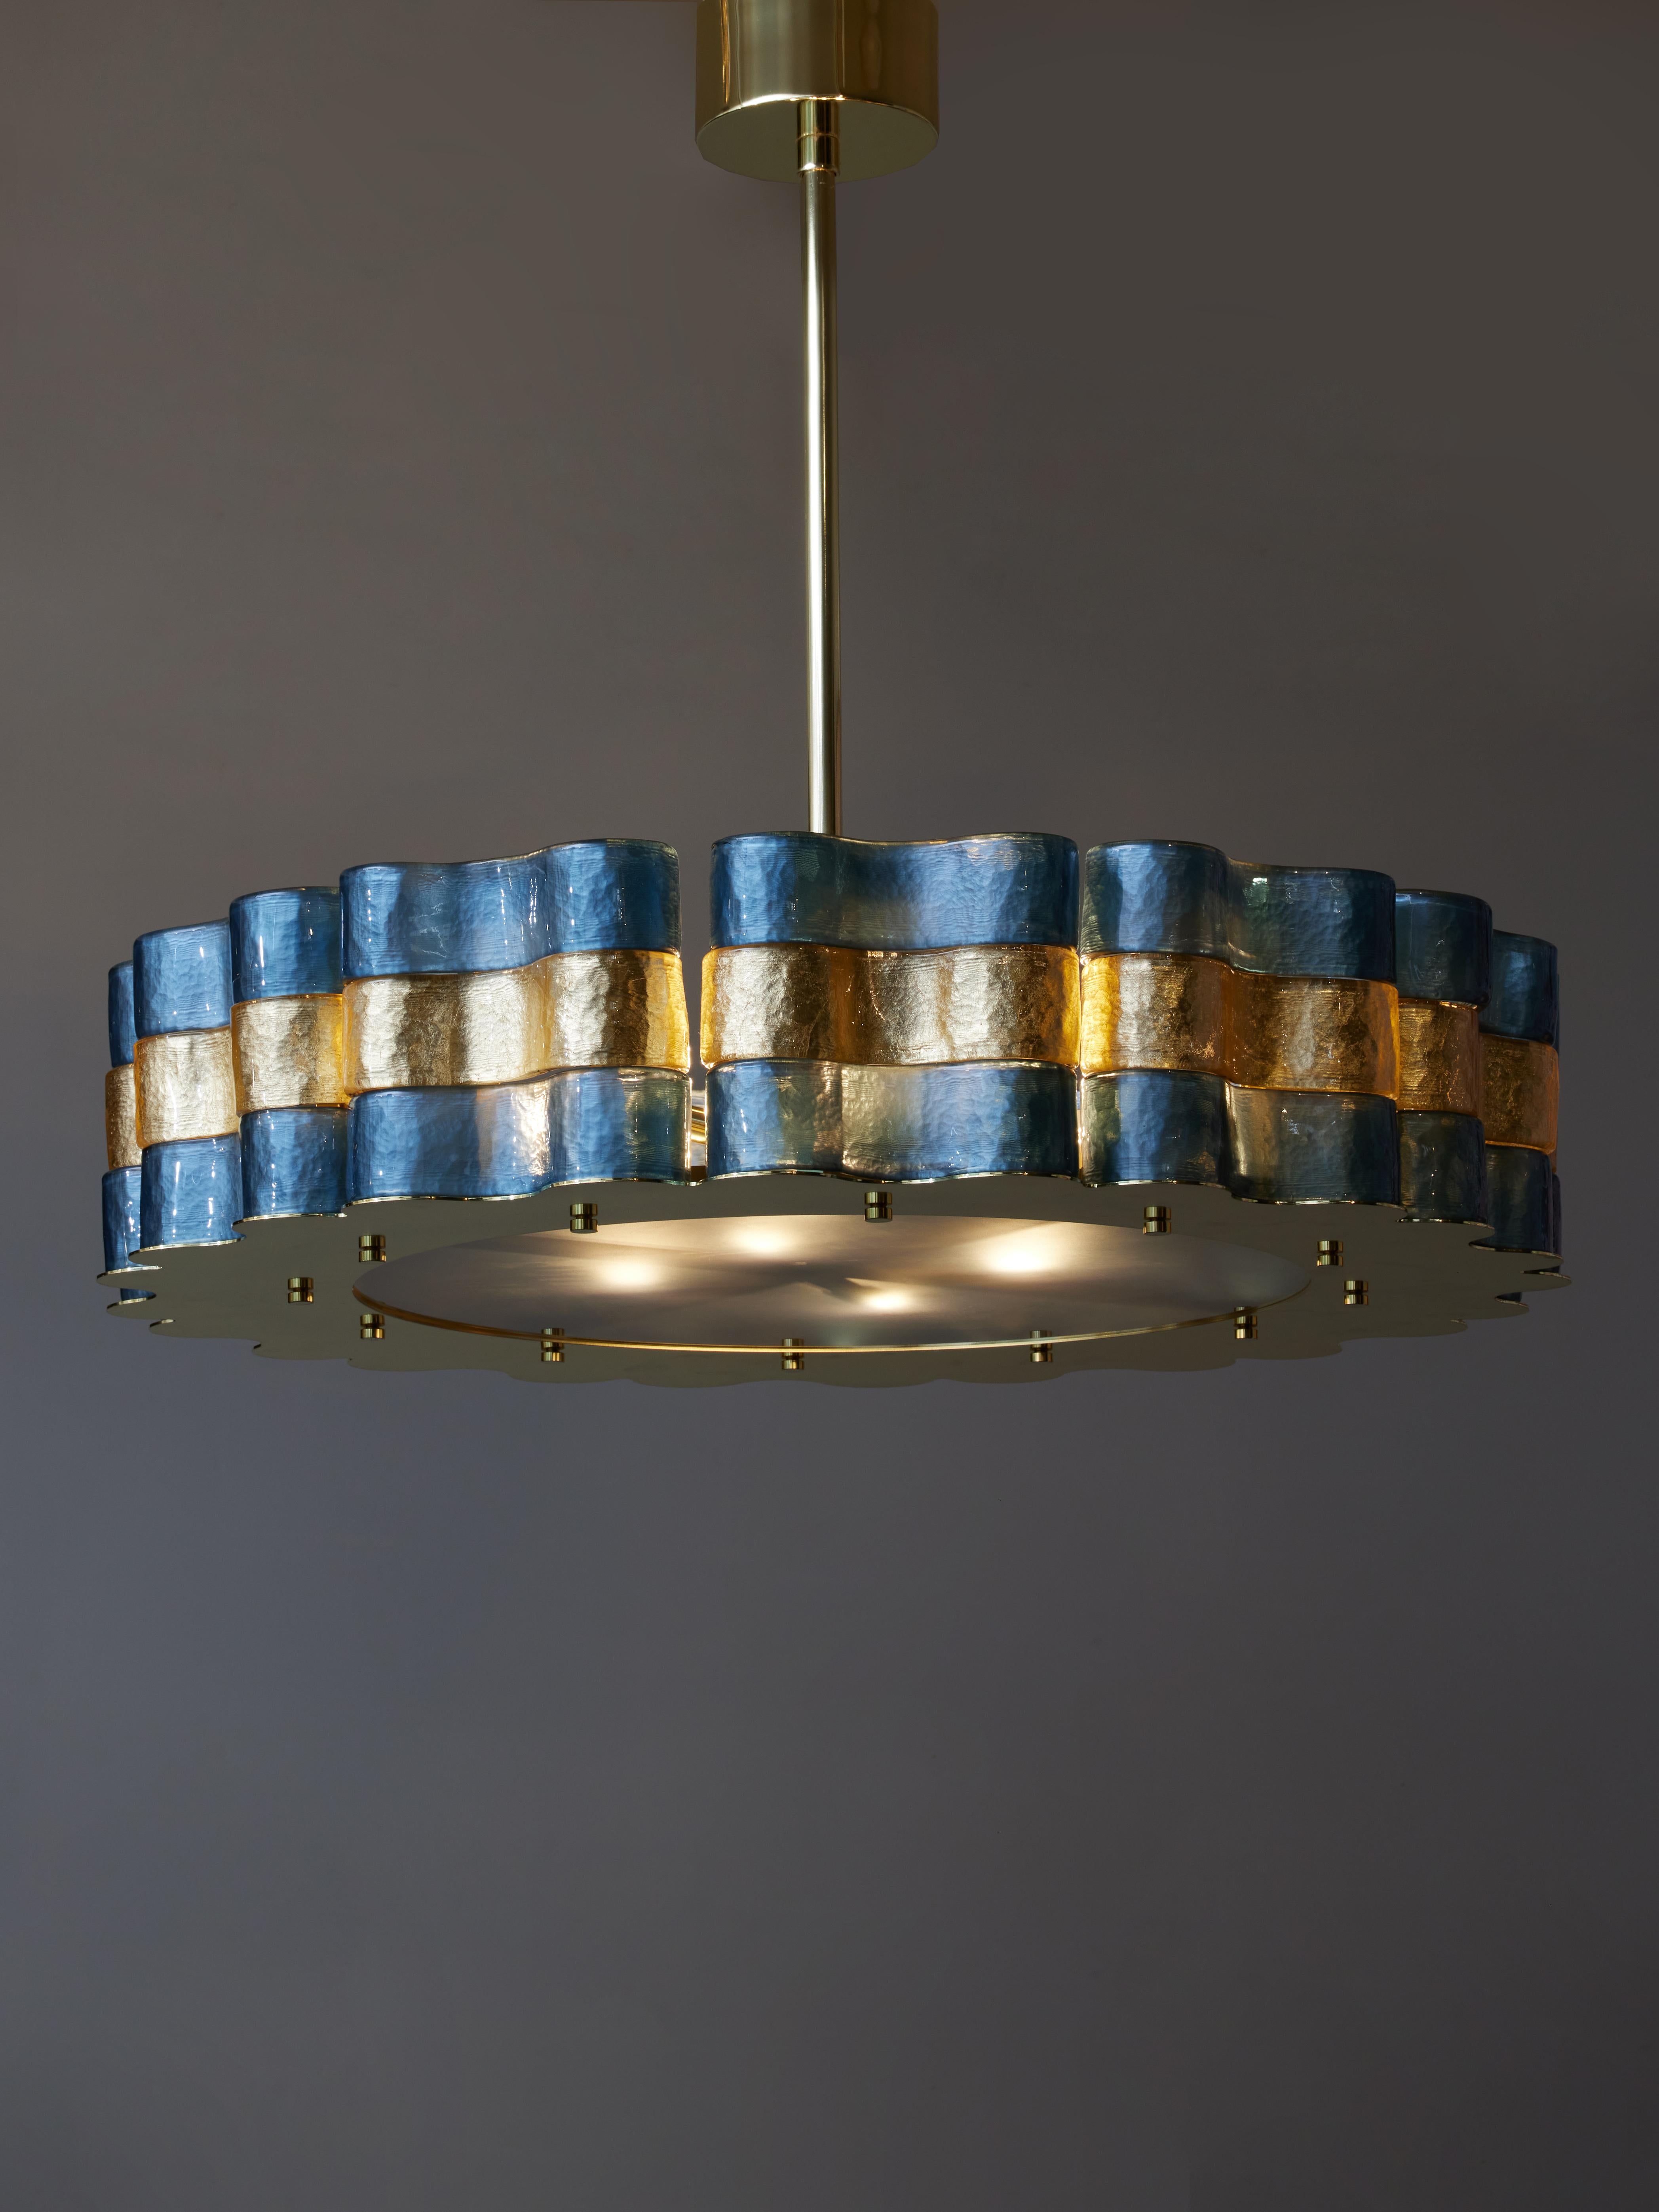 Round chandelier made of a brass structure on which are placed wavy pieces of Murano glass, alternating between gold and dark blue.